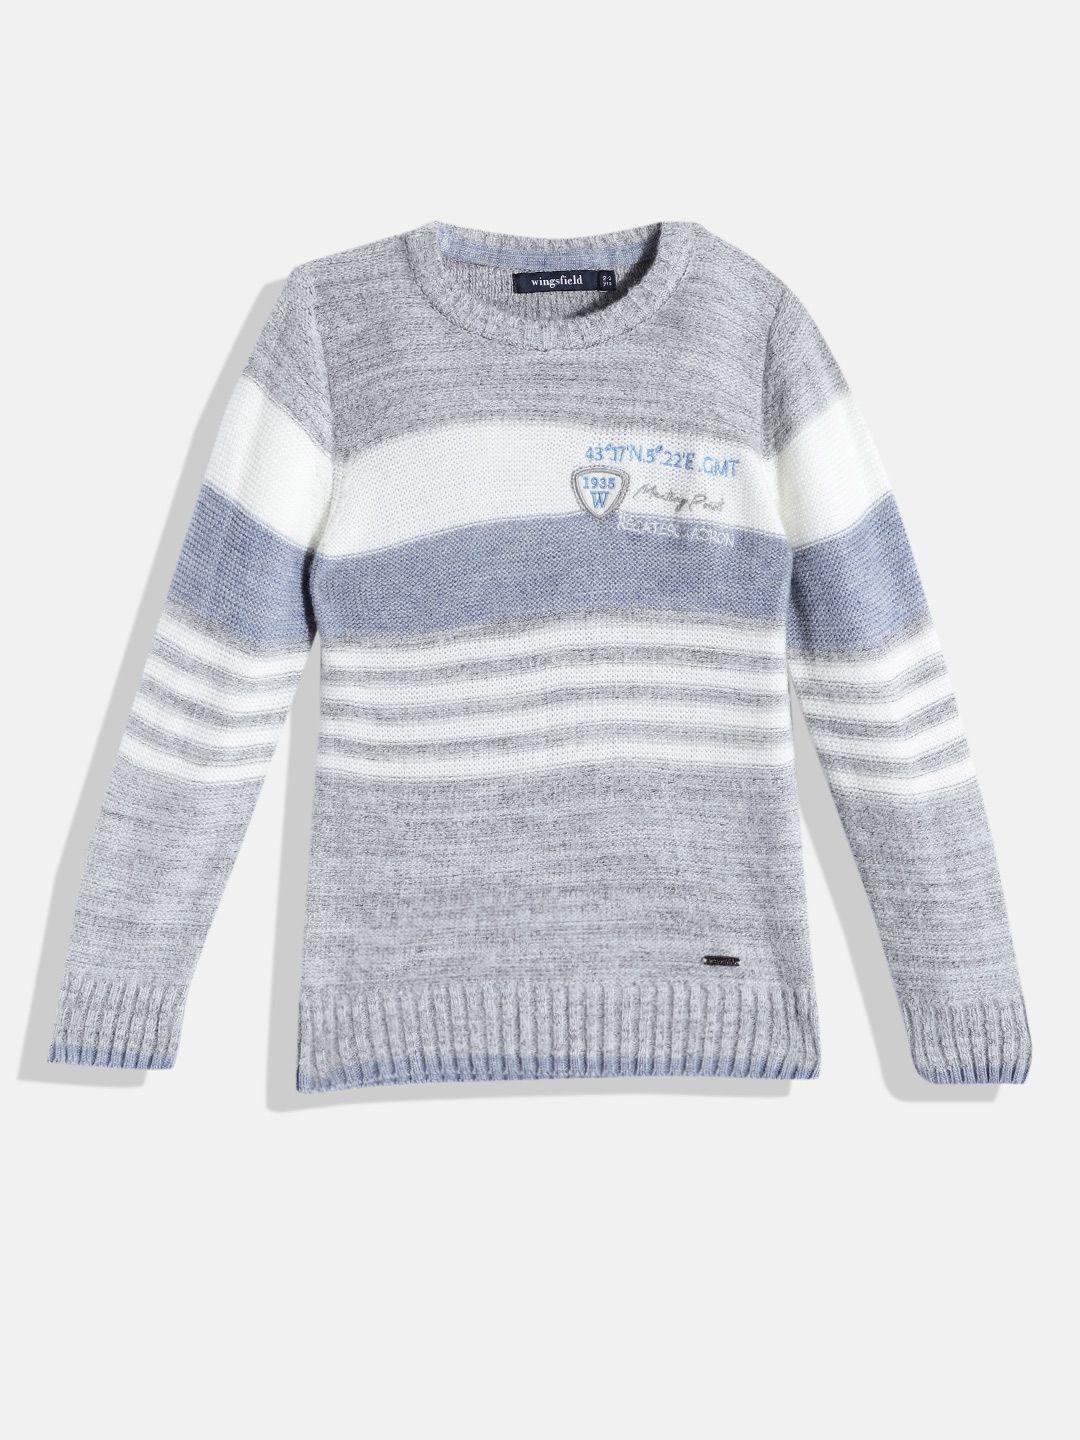 wingsfield-boys-grey-&-white-striped-acrylic-pullover